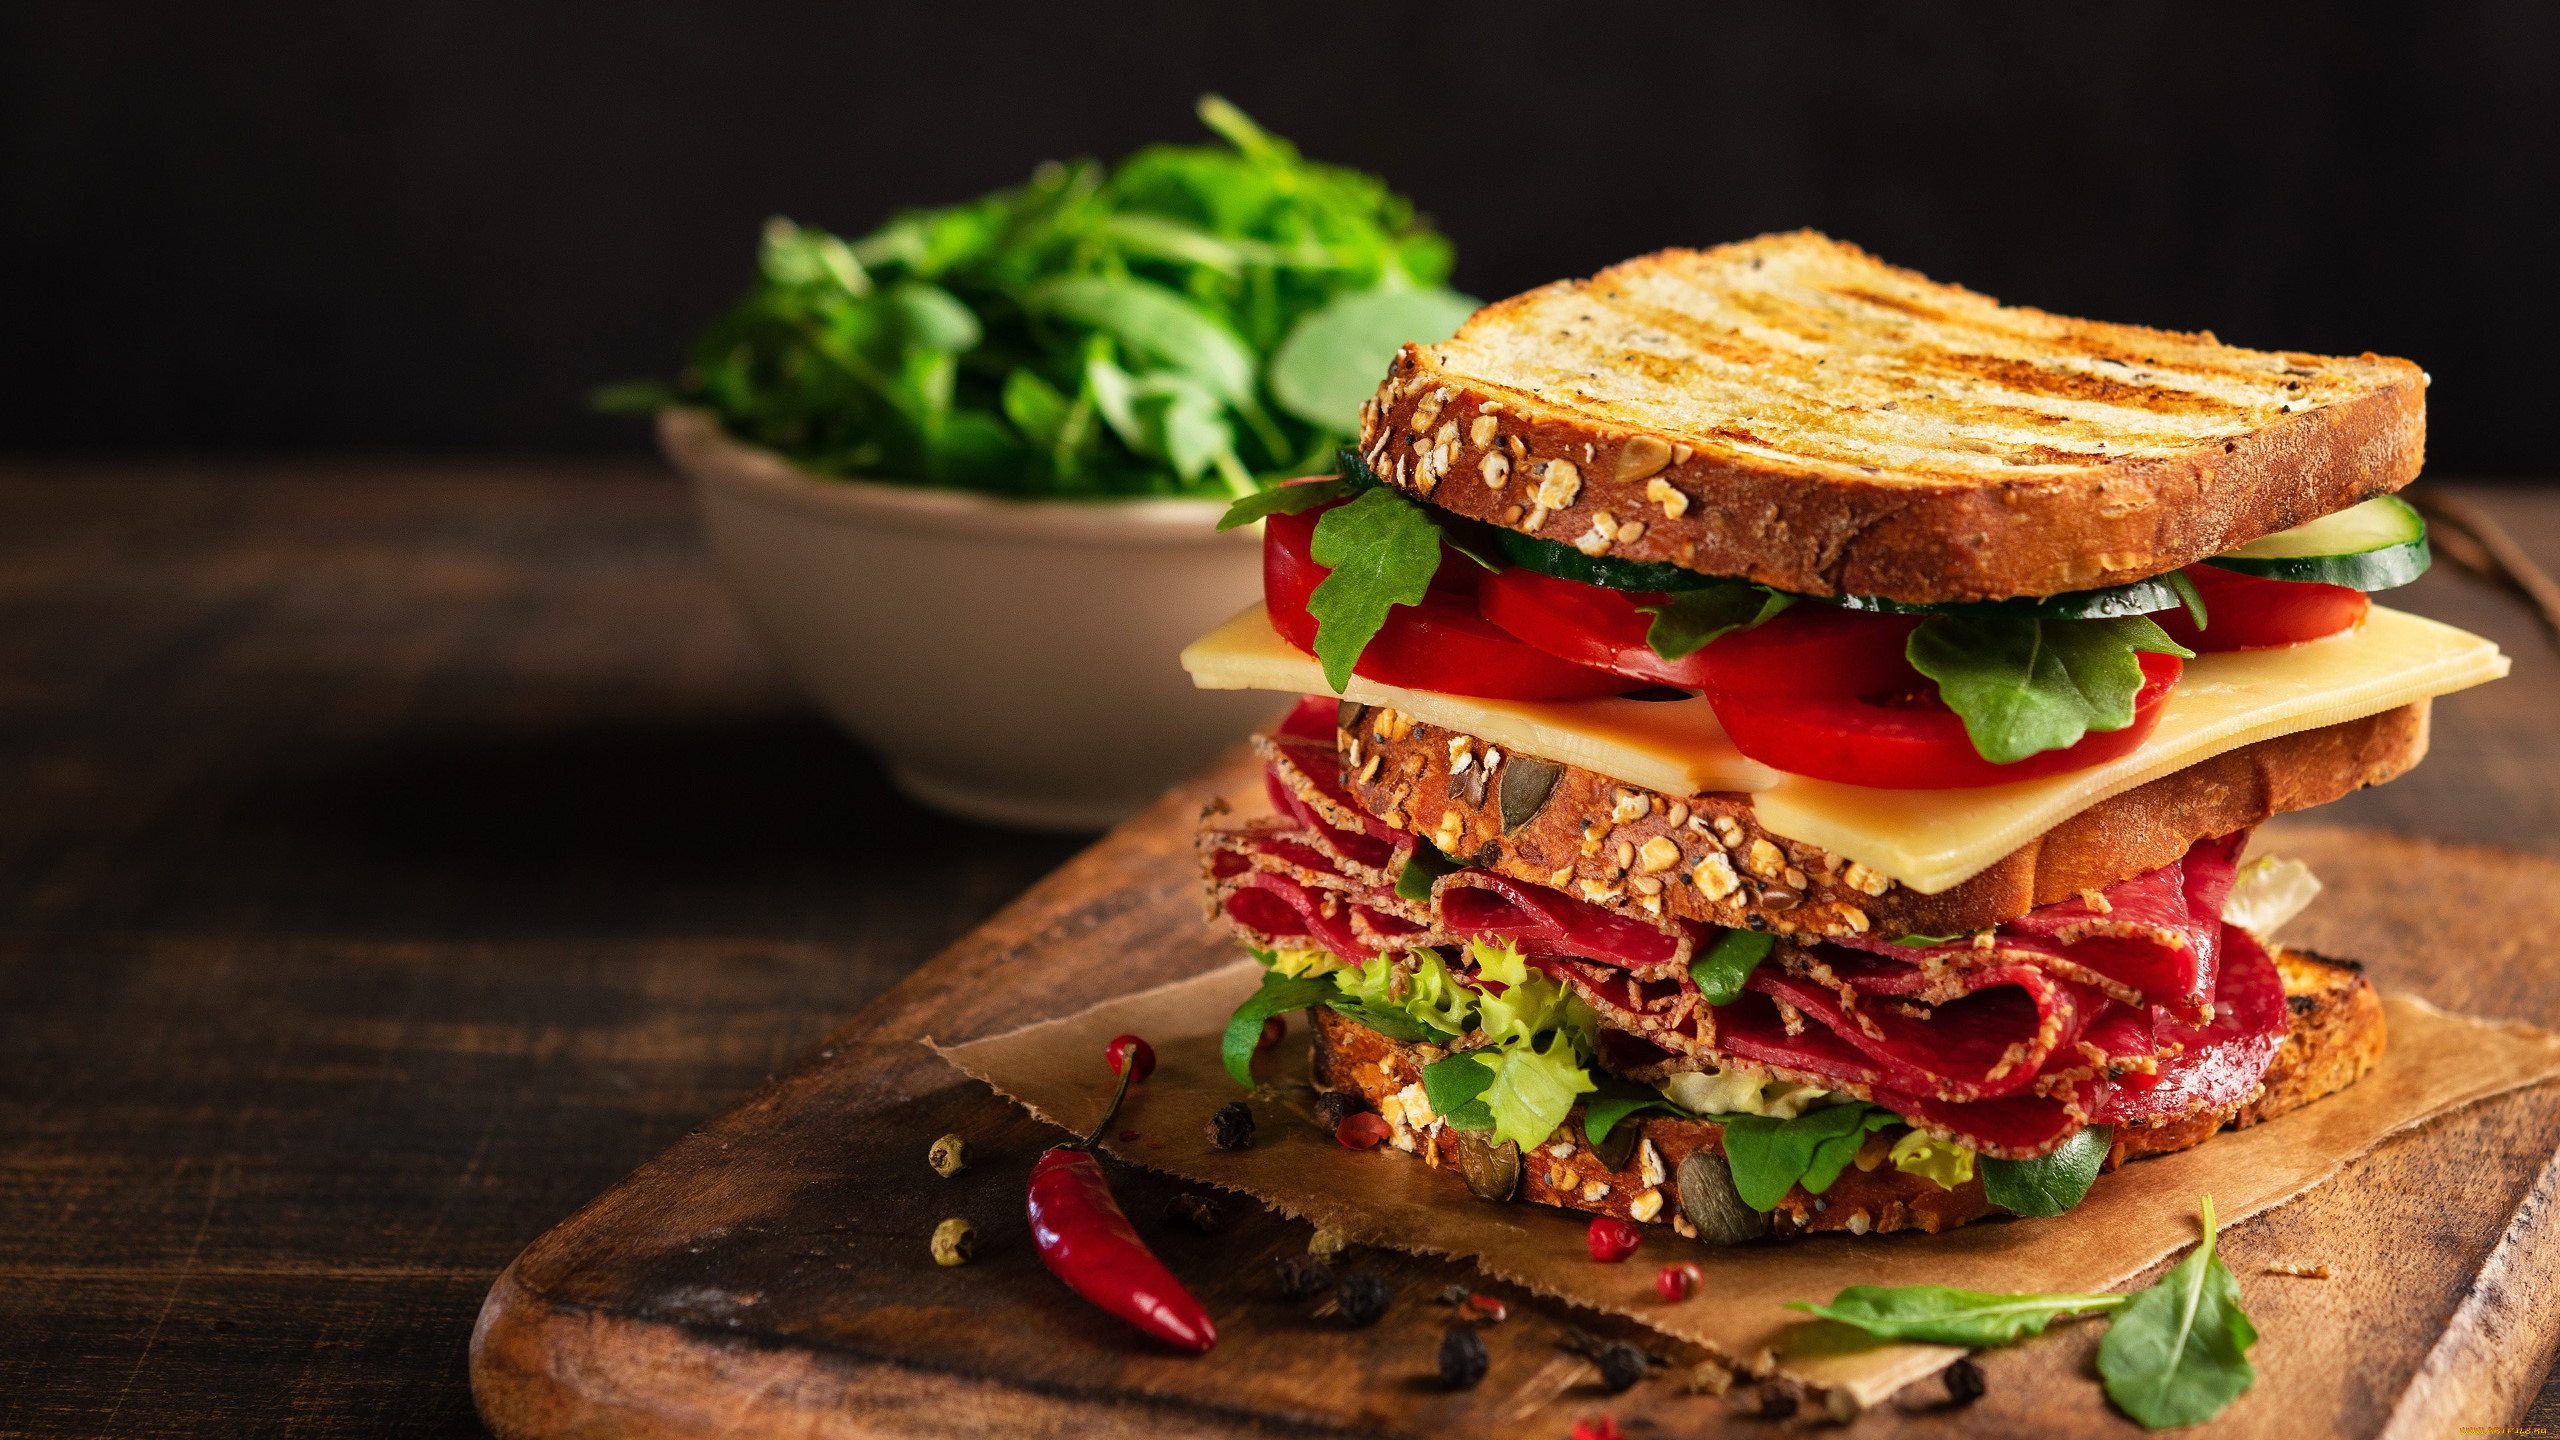 Food Salad Sandwich Vegetables Bread Sausage Cheese Pepper 2560x1440